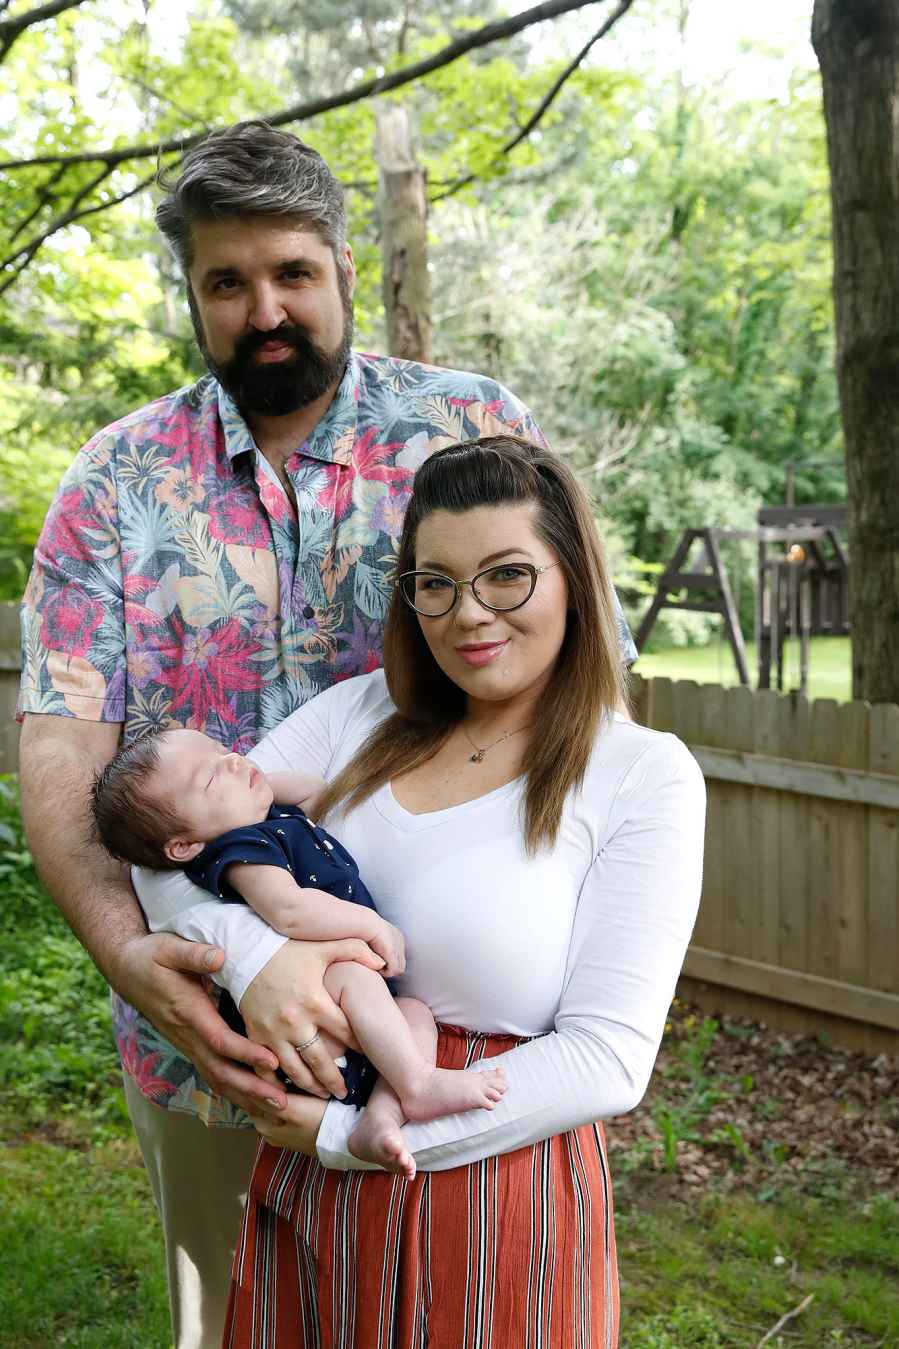 Reacts to Audio of Amber Portwood Allegedly Assaulting Andrew Glennon